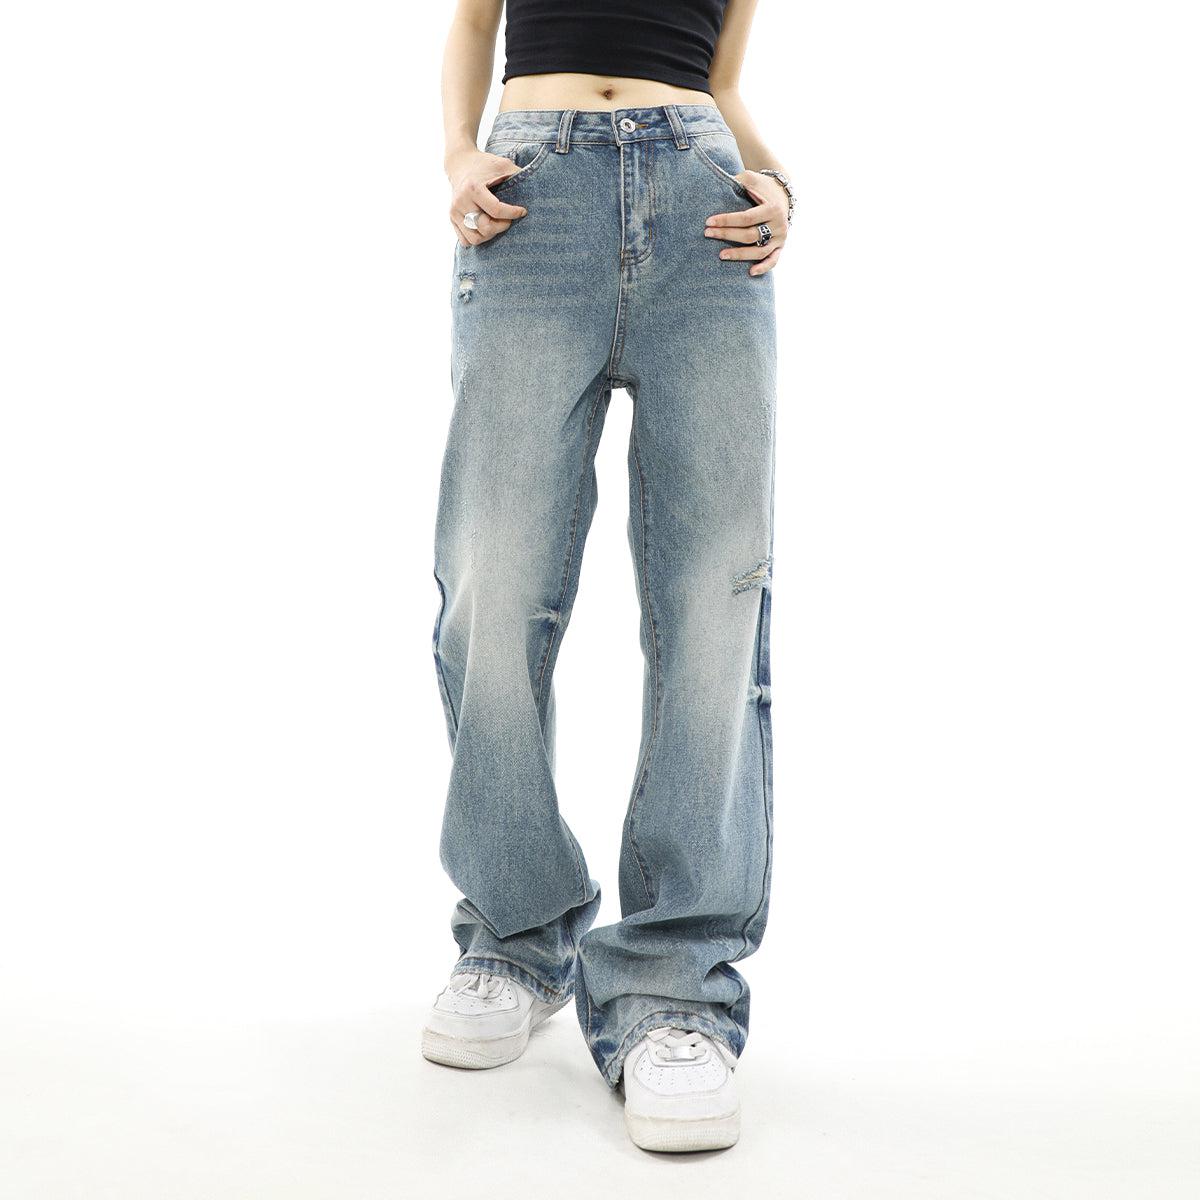 Washed Distressed Style Loose Jeans Korean Street Fashion Jeans By Mr Nearly Shop Online at OH Vault